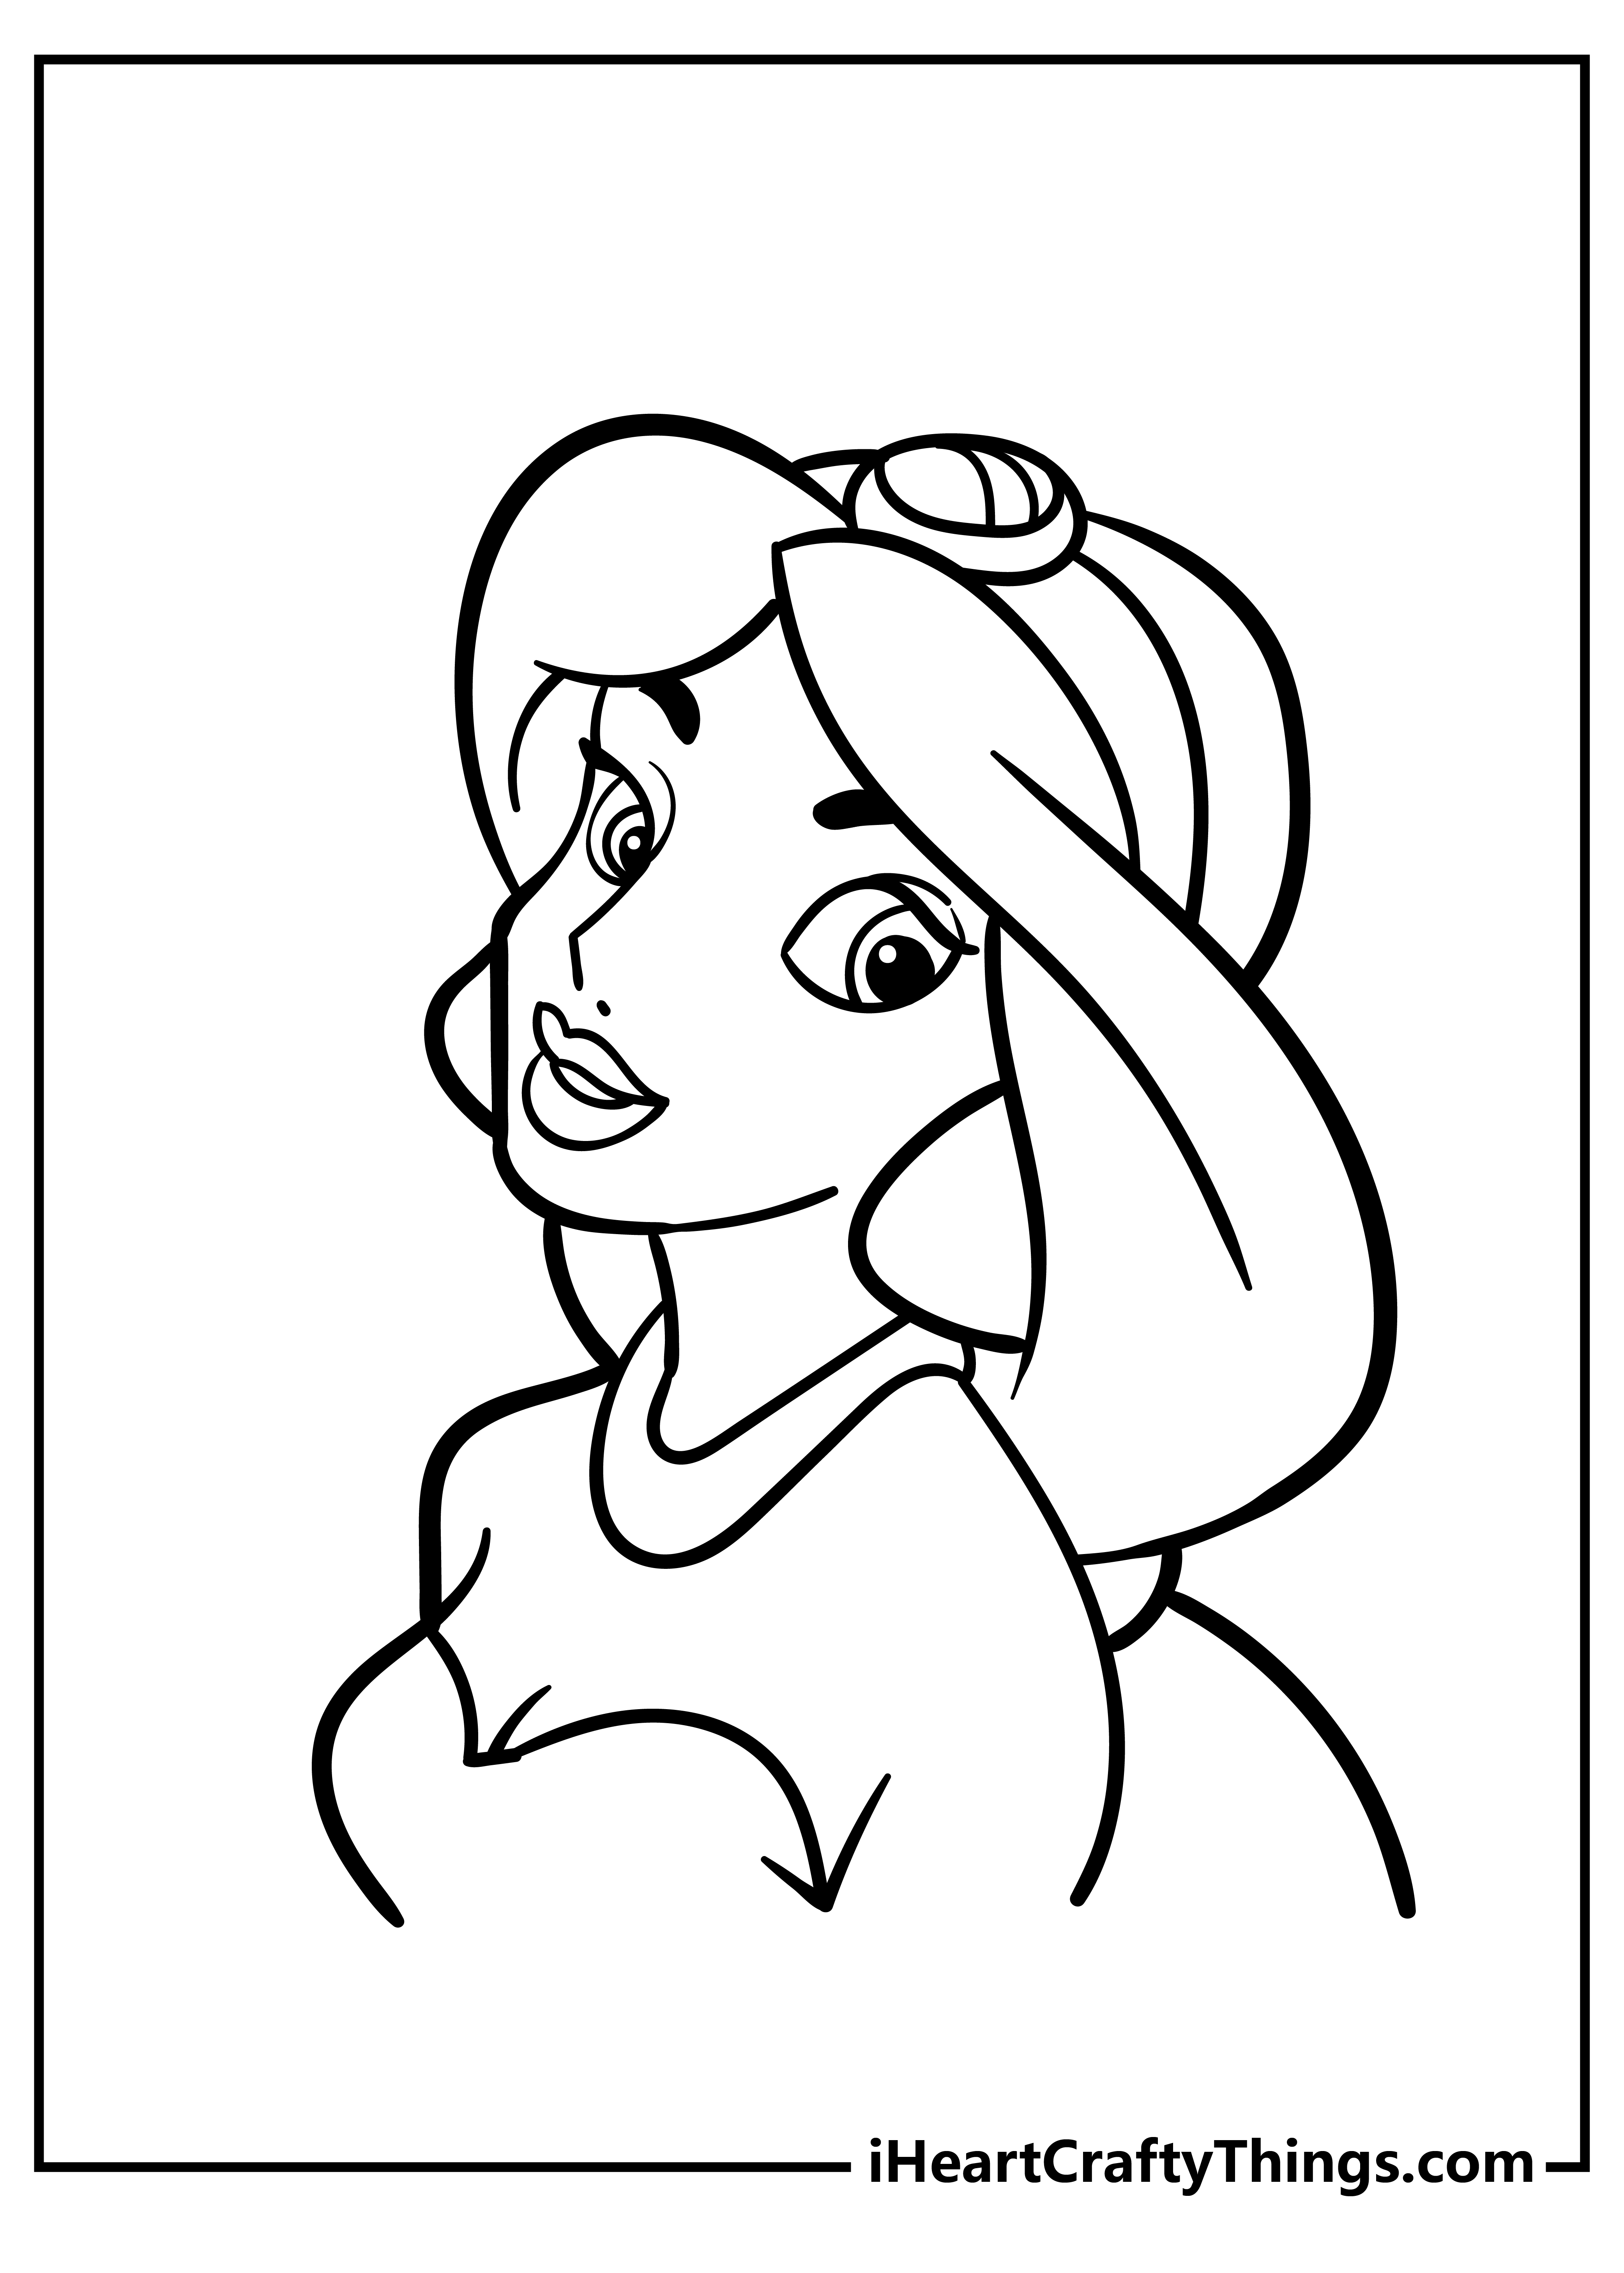 Printable Jasmine Coloring Pages Updated 20